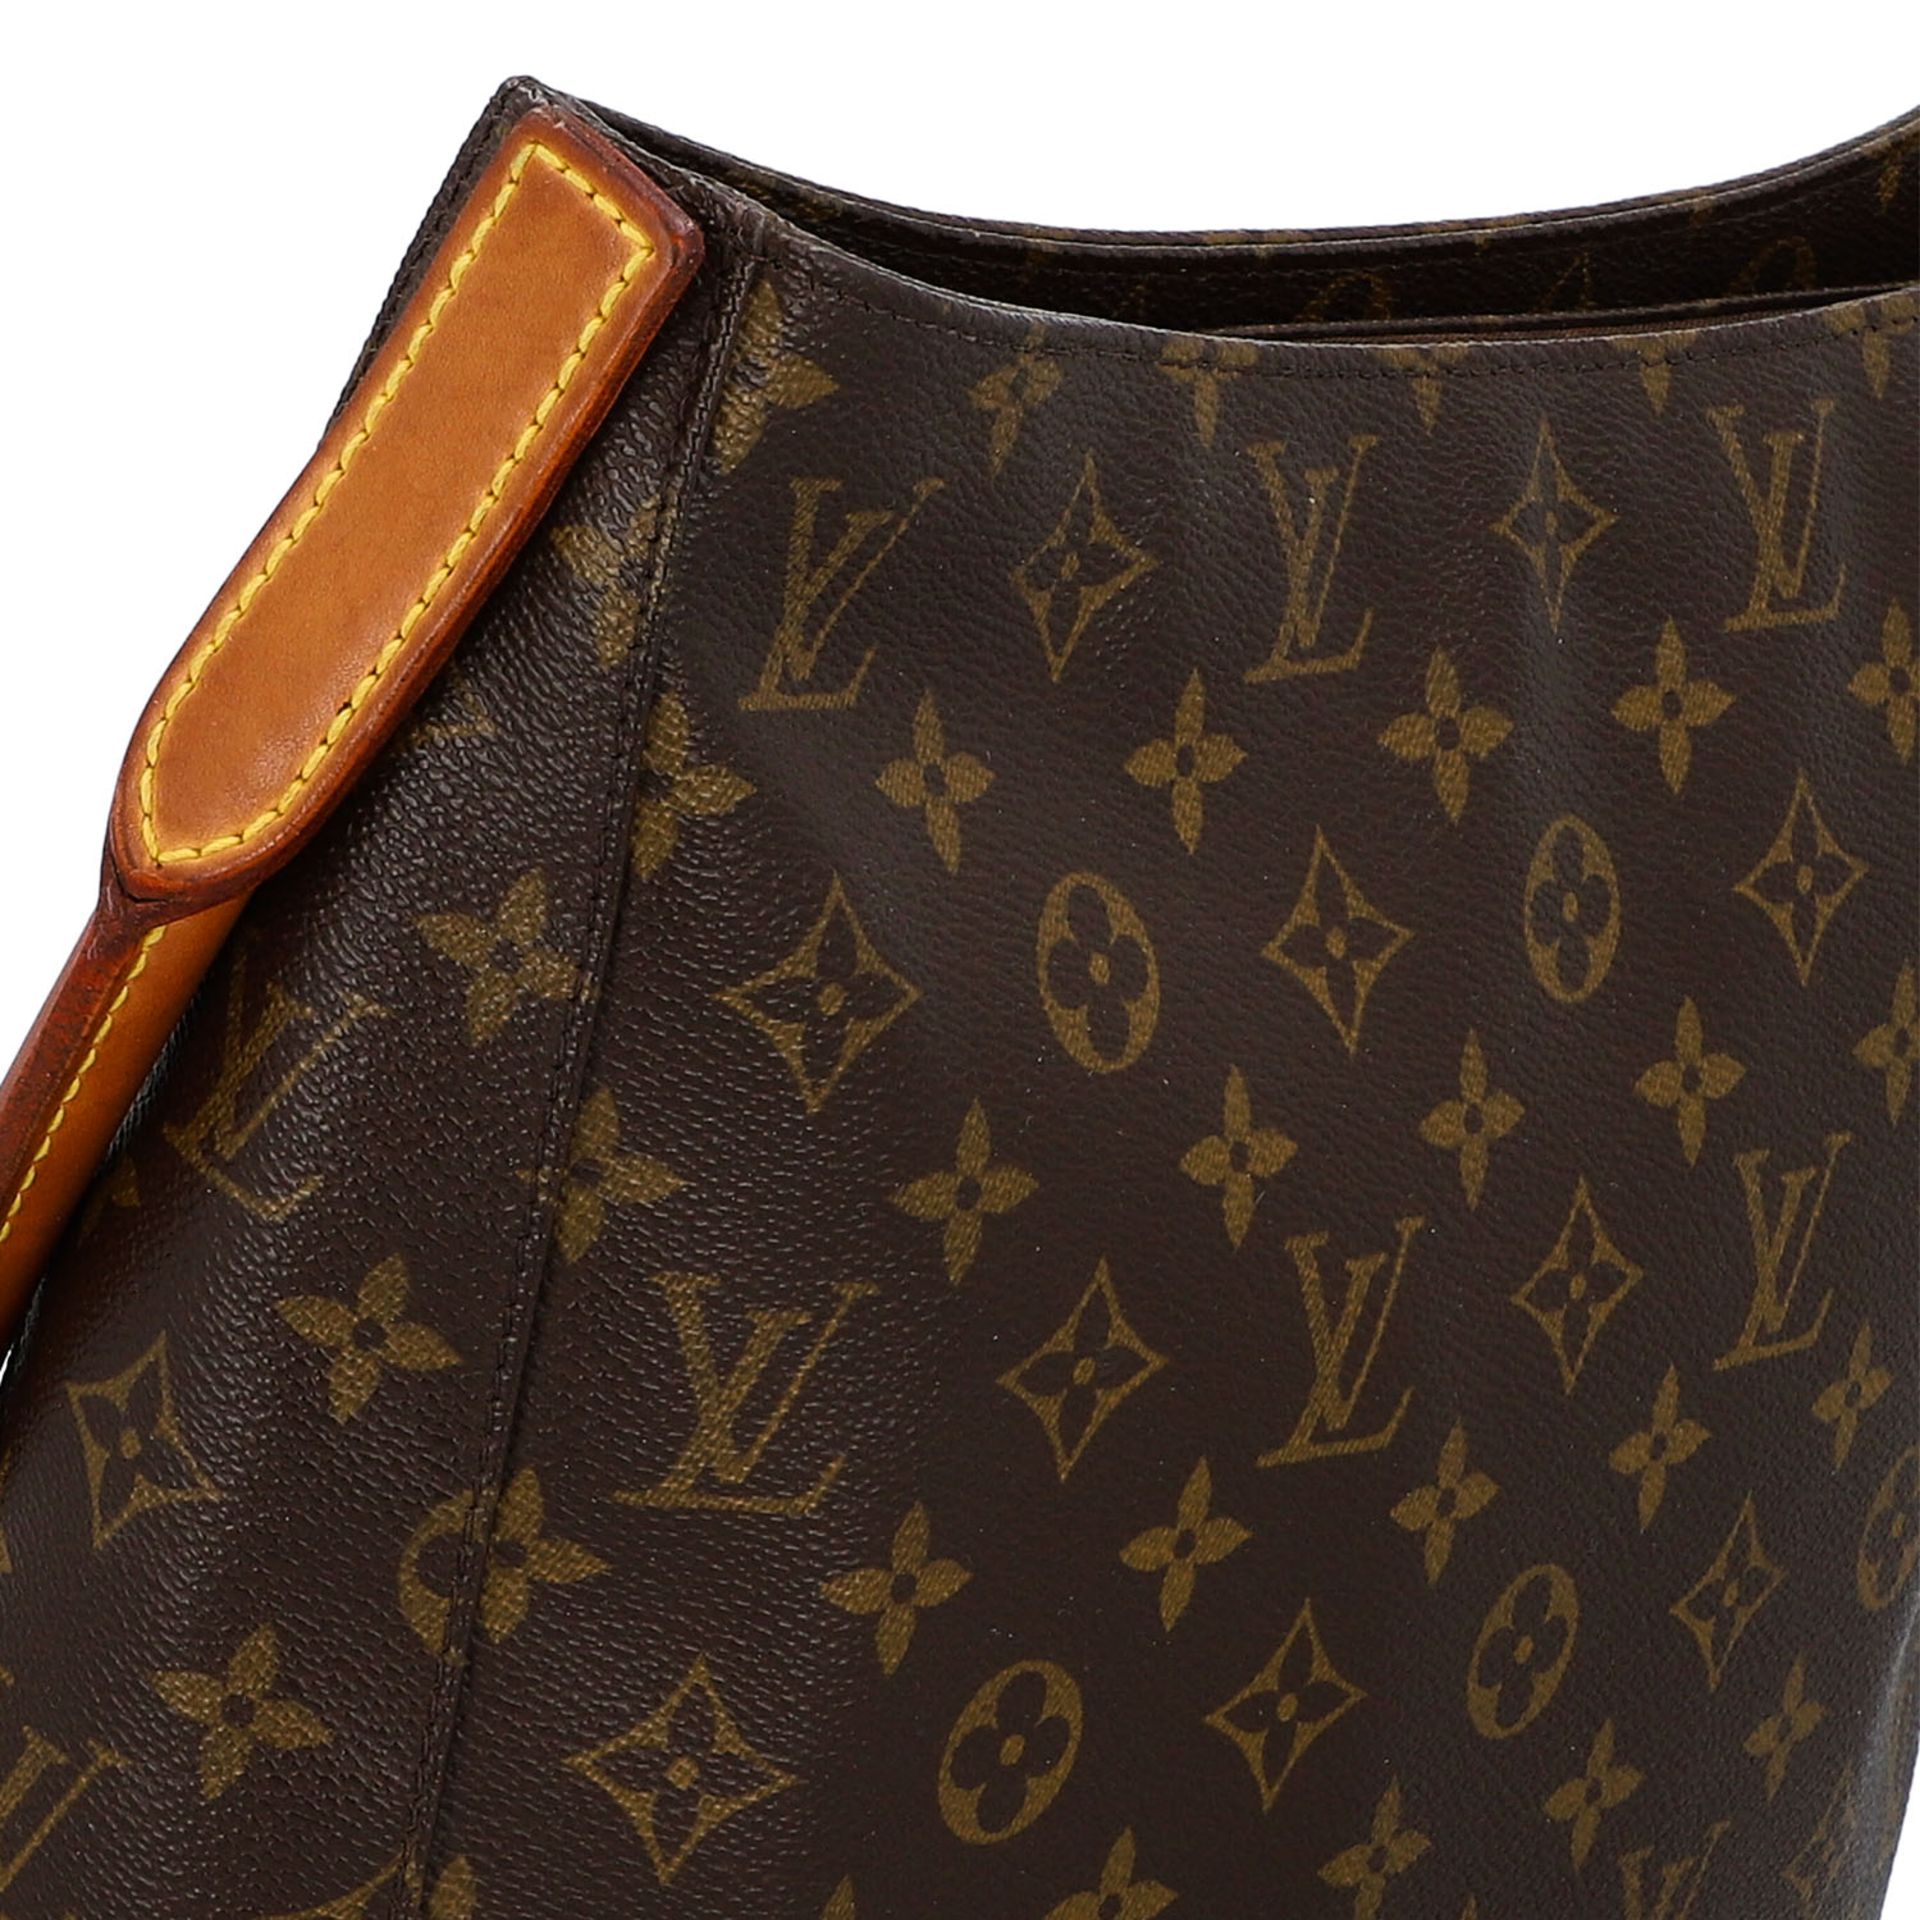 LOUIS VUITTON Schultertasche "LOOPING". - Image 8 of 8